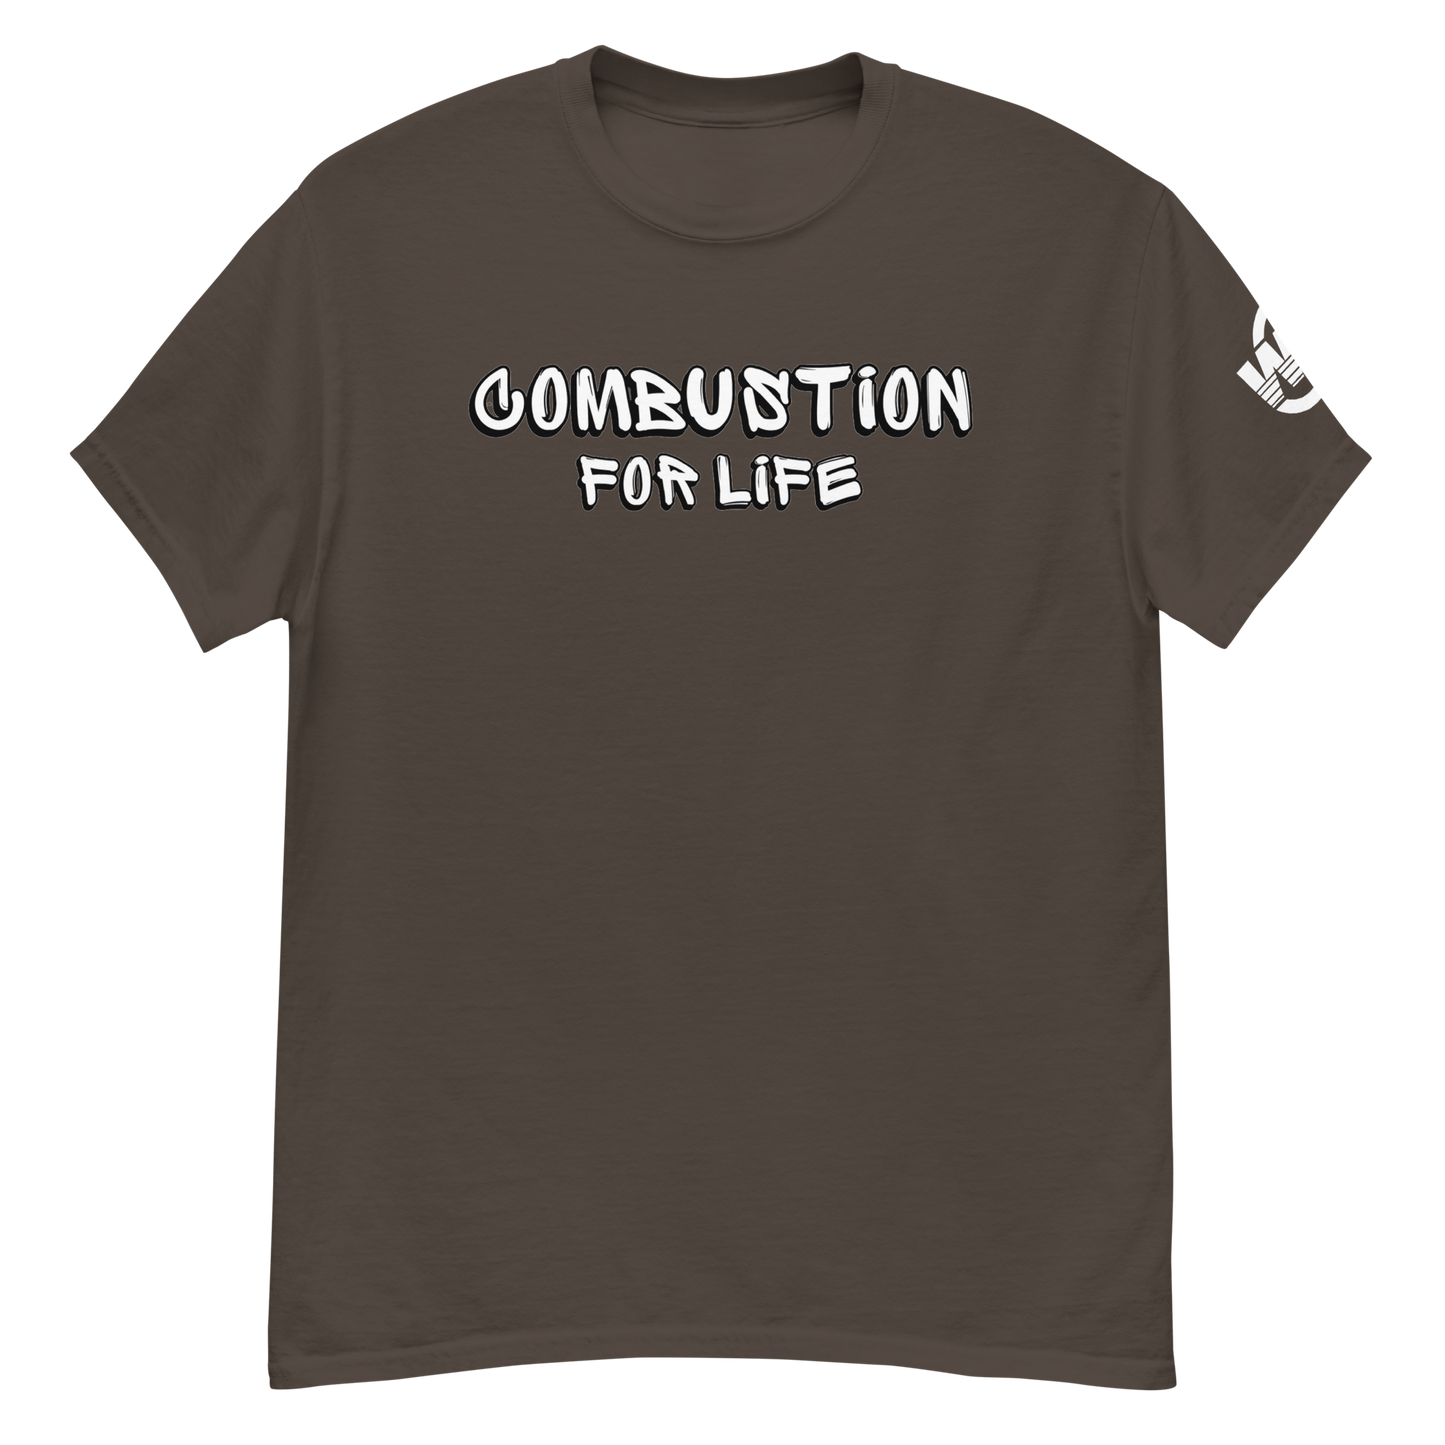 Combustion for Life by WB. Artist20